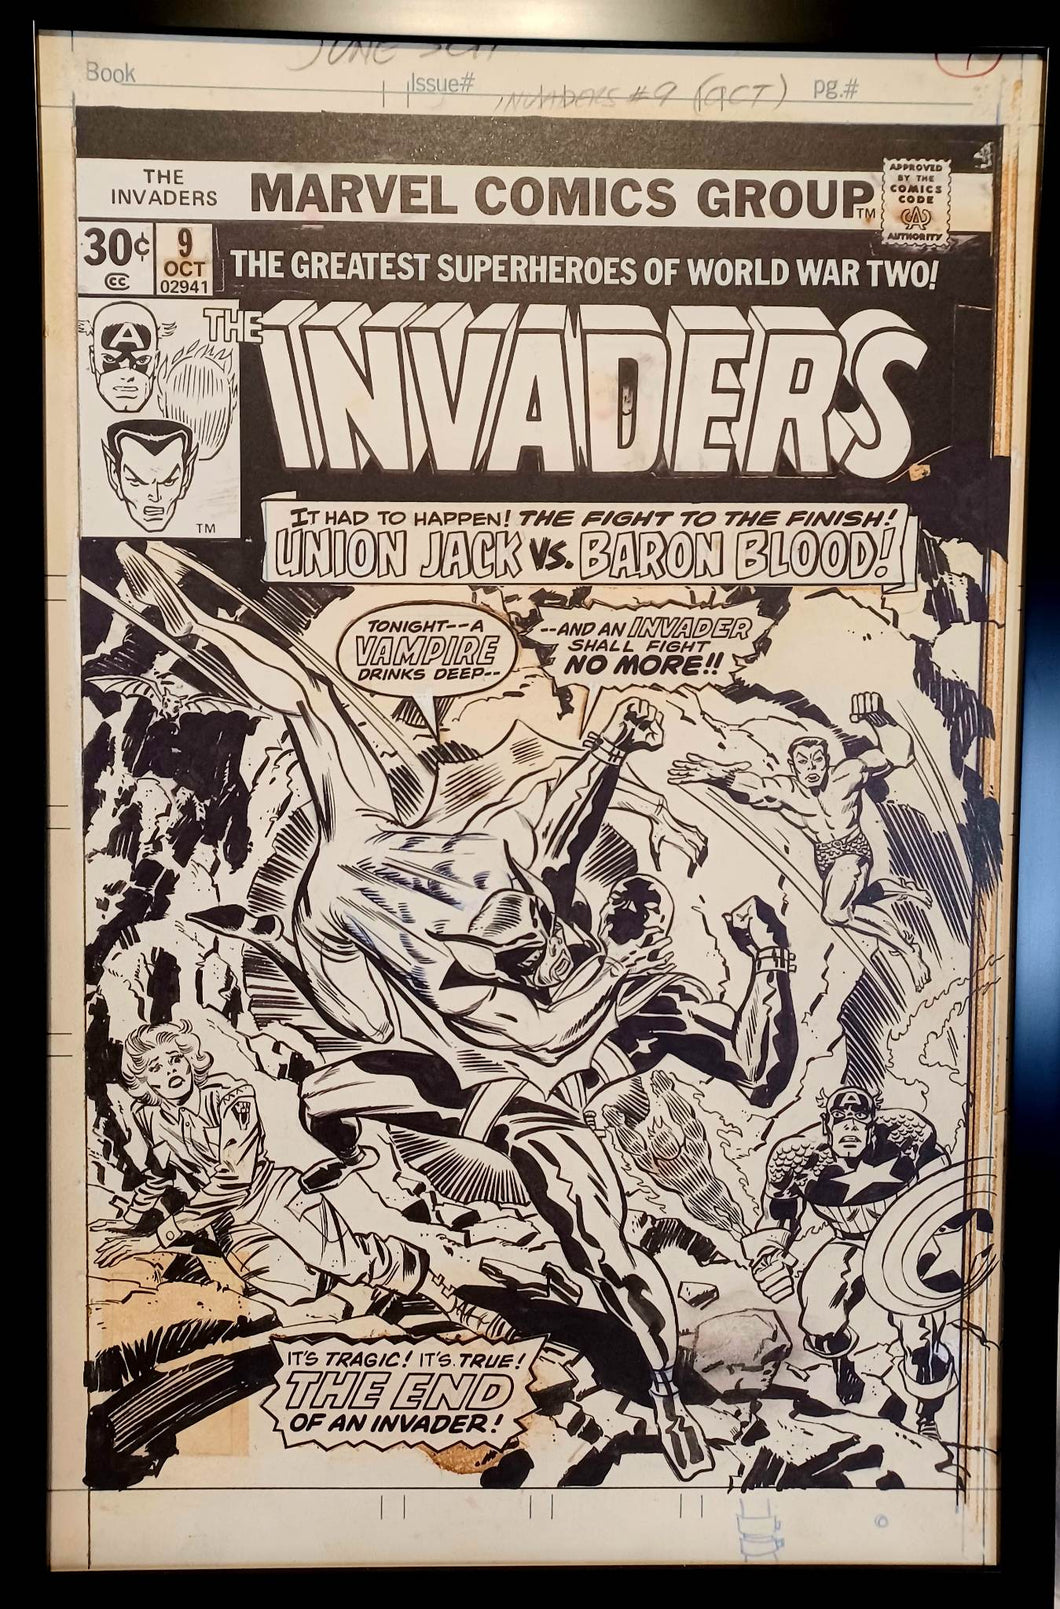 Invaders #9 WWII by Jack Kirby 11x17 FRAMED Original Art Poster Marvel Comics